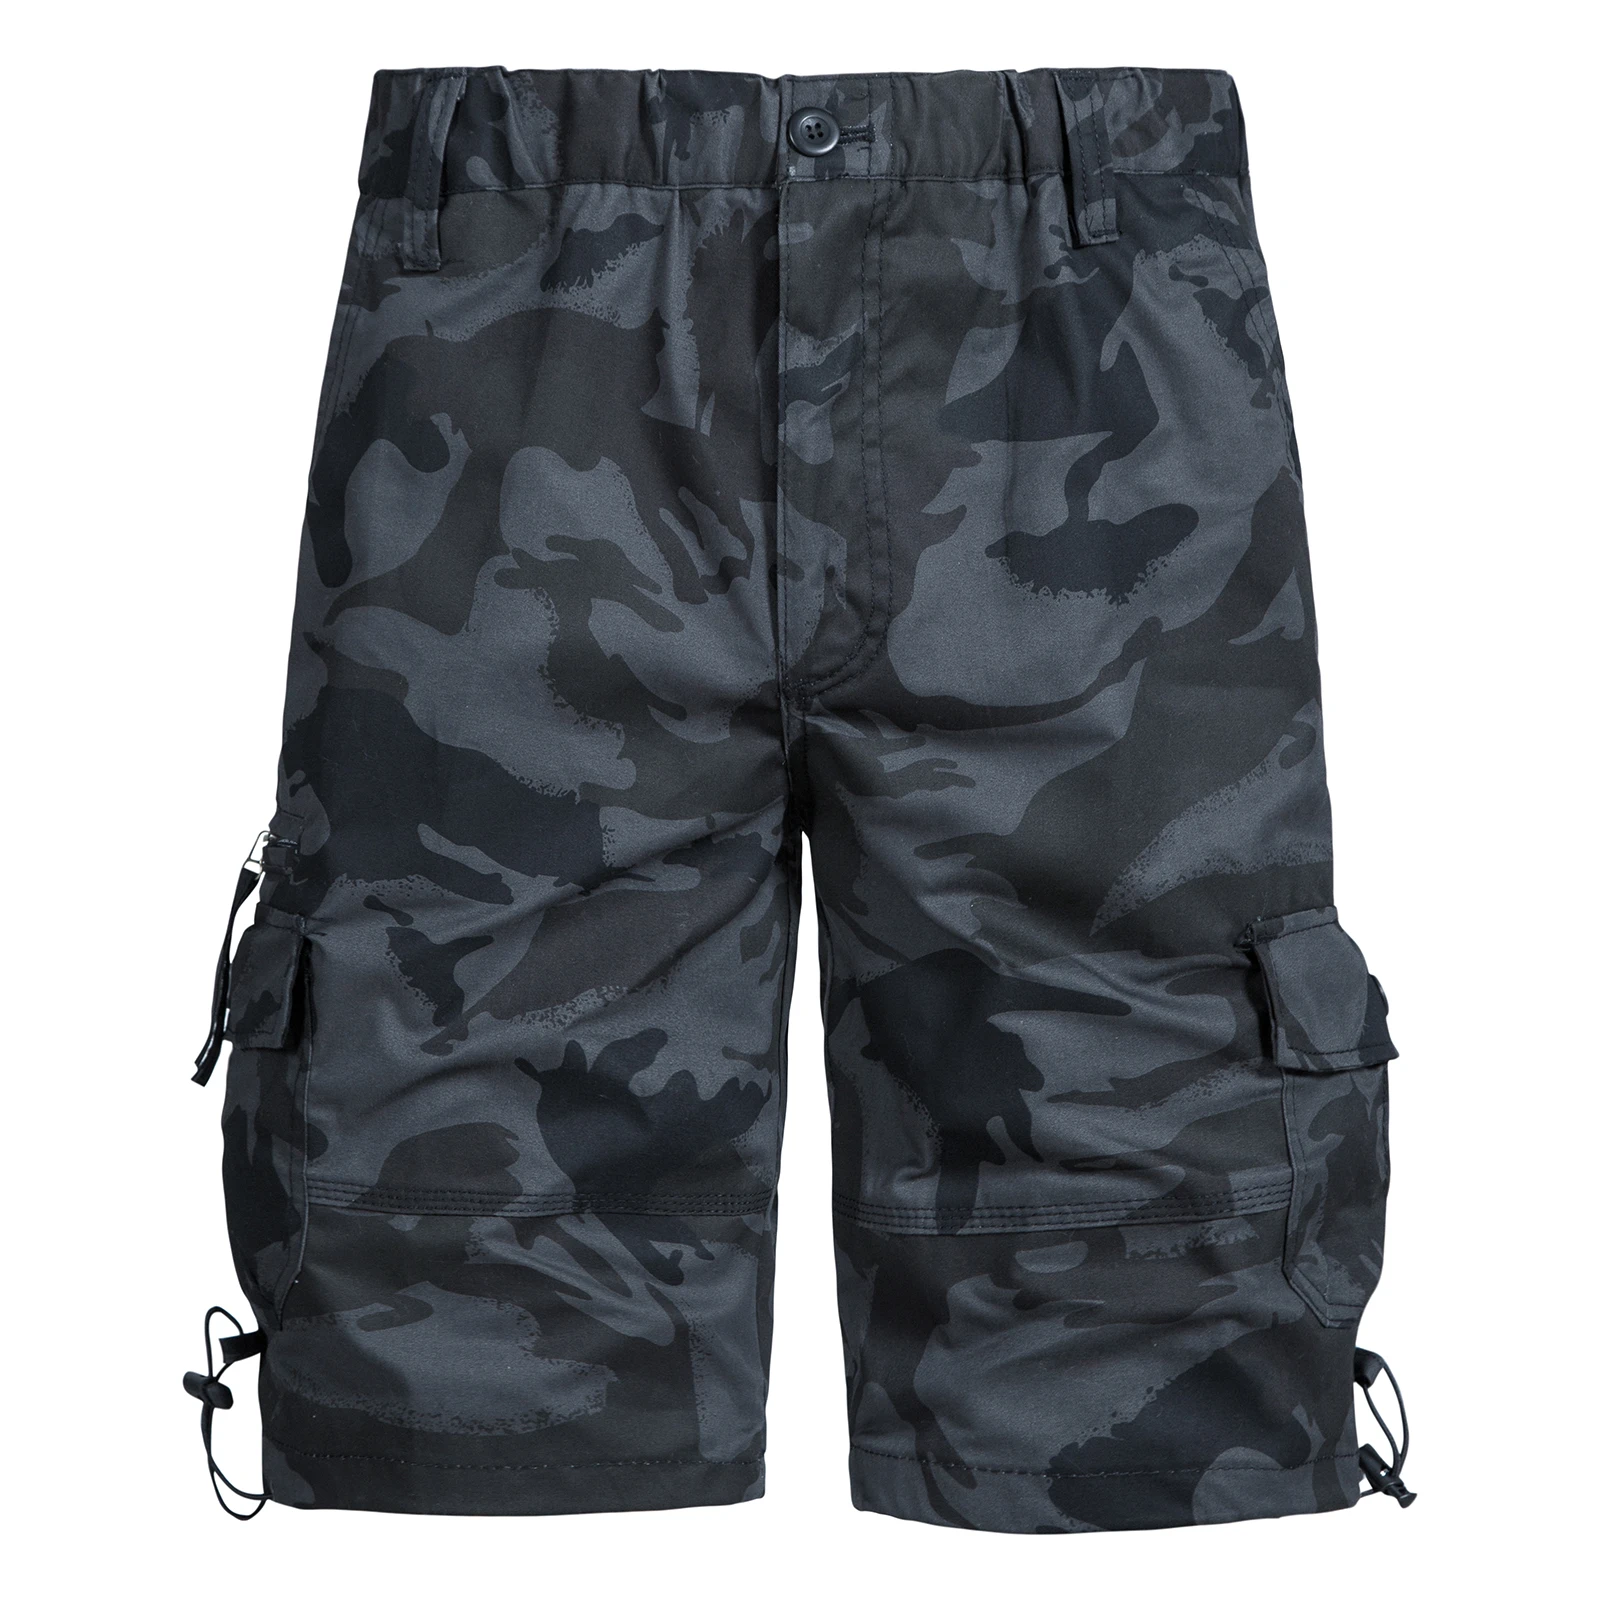 Summer Shorts for Men Camouflage Military Cargo Work Cotton Gym Swimming Large Size 5XL Camo Bermuda Tactical Knee Half Pants